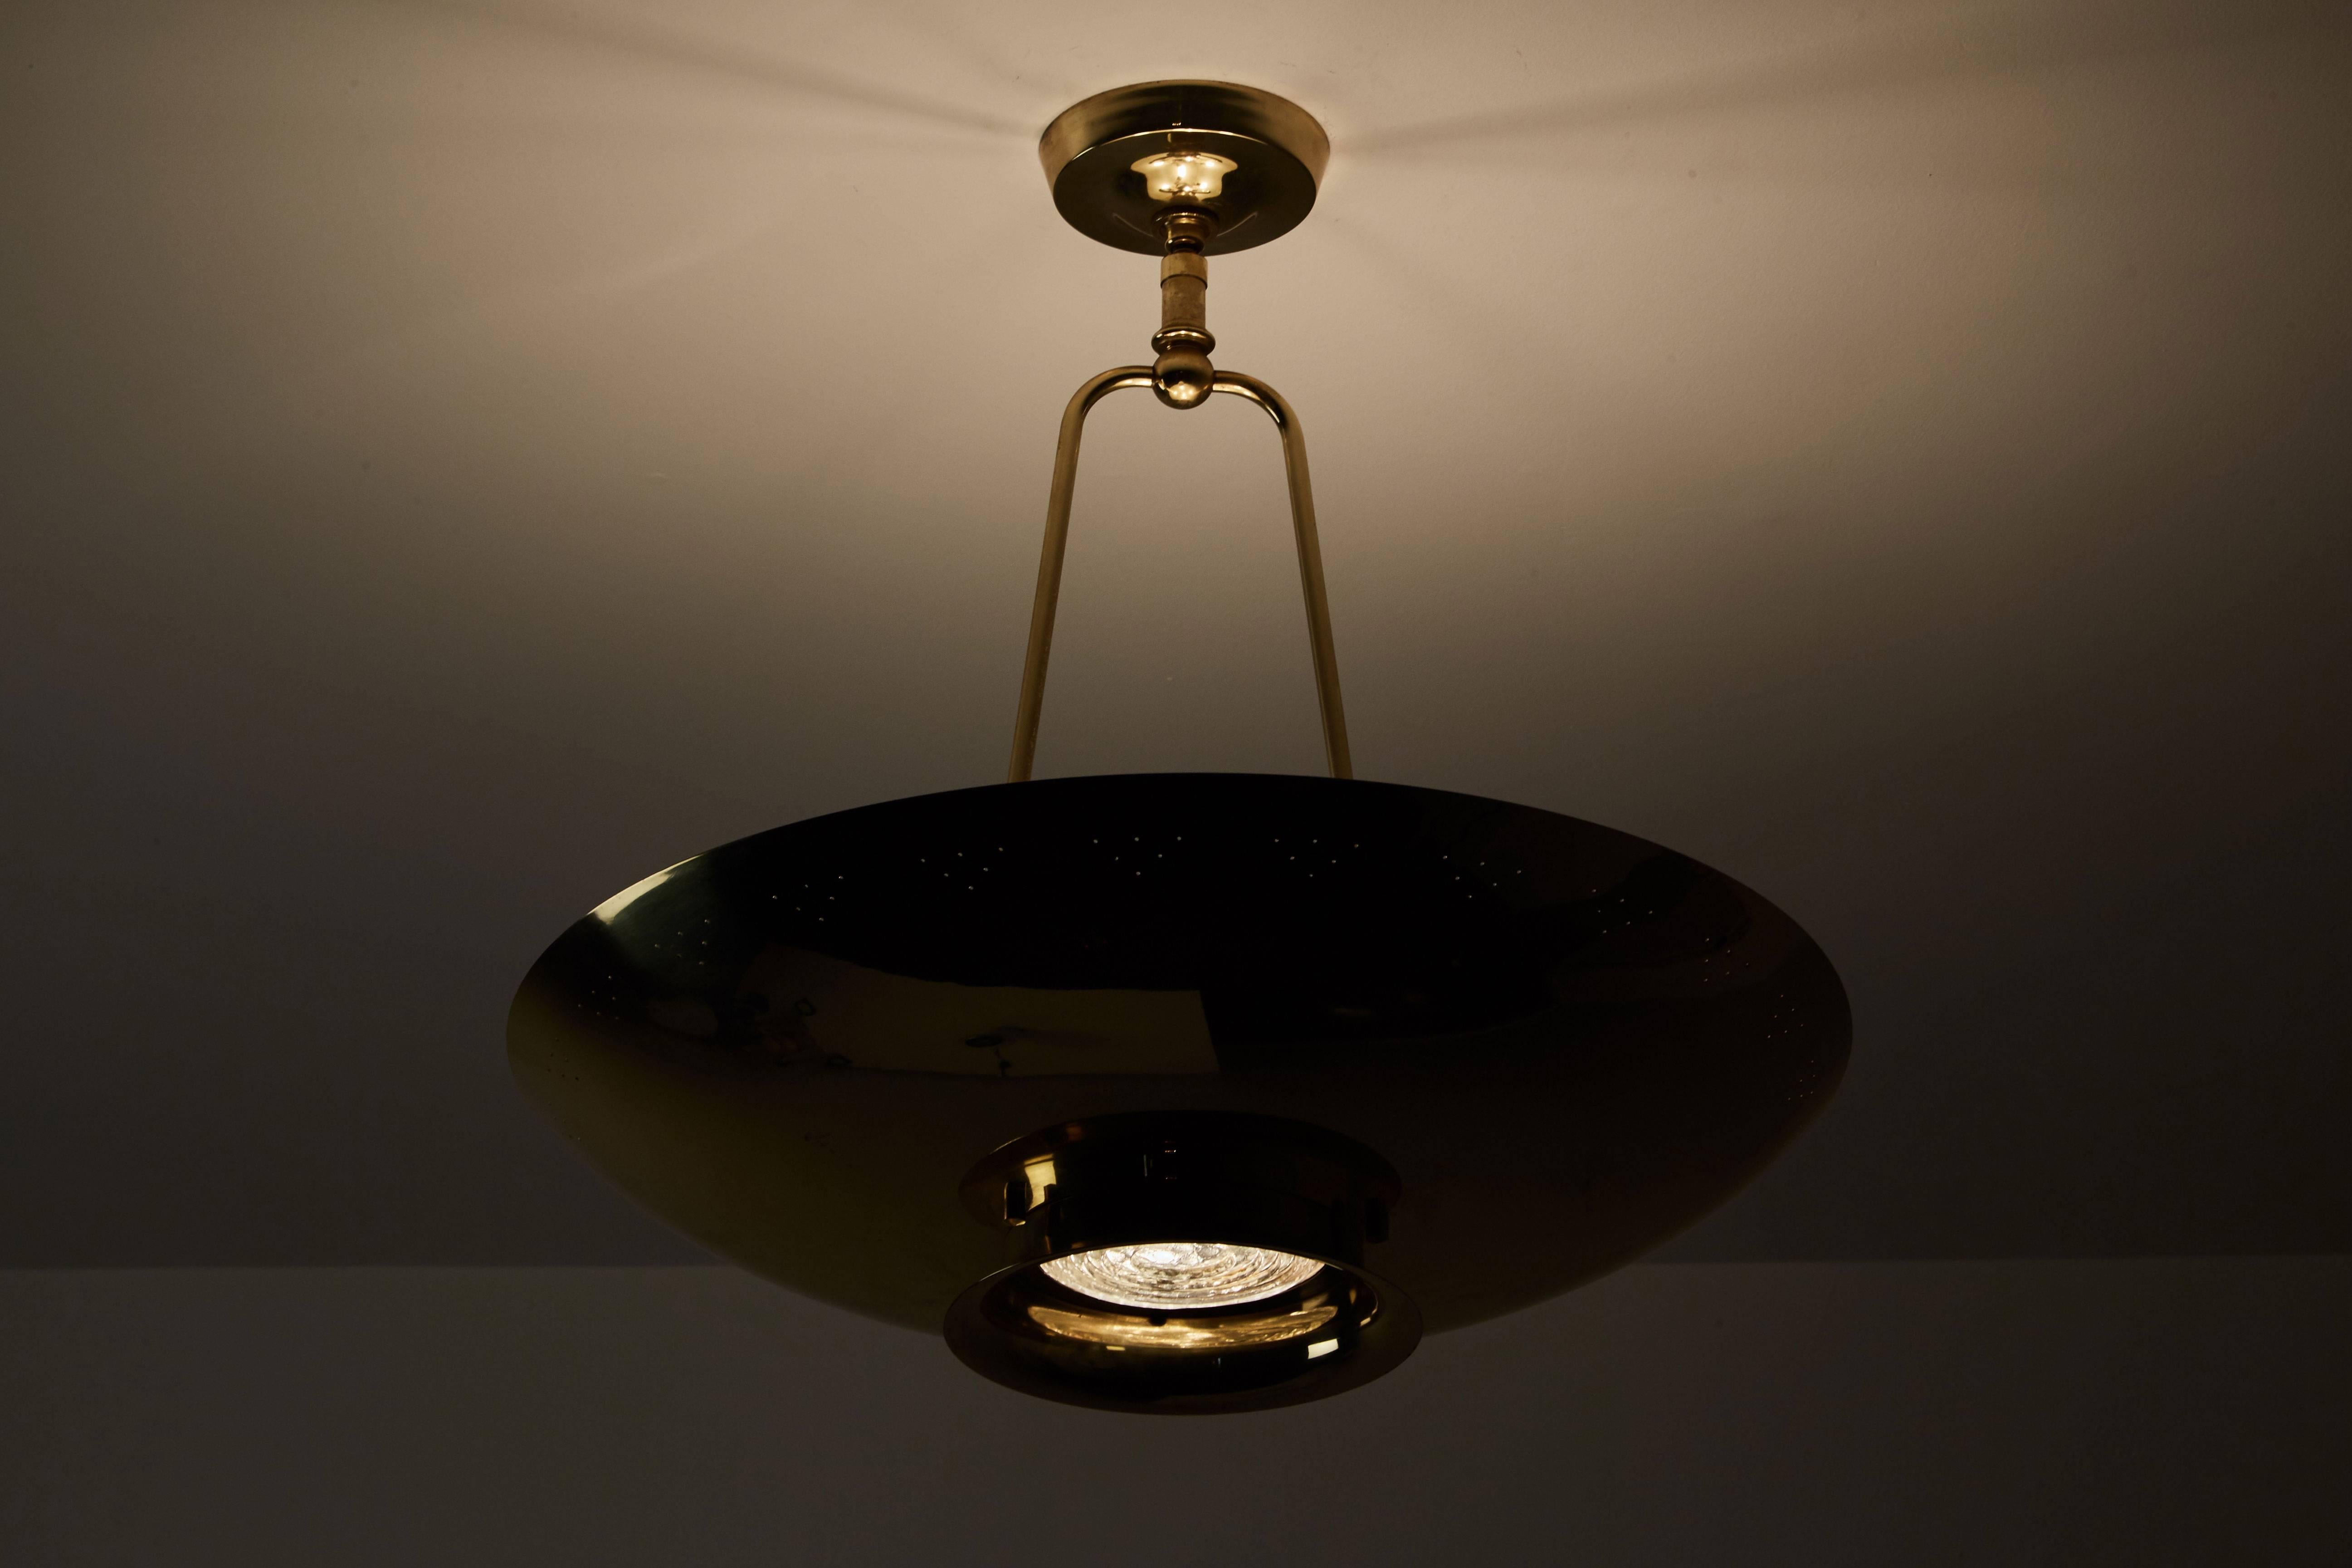 Perforated brass ceiling light by Stiffel. Designed in the United States, circa 1950s. Holophane glass diffuser provides downlight. Retains original manufacturers label. Takes five E26 25w maximum bulbs.